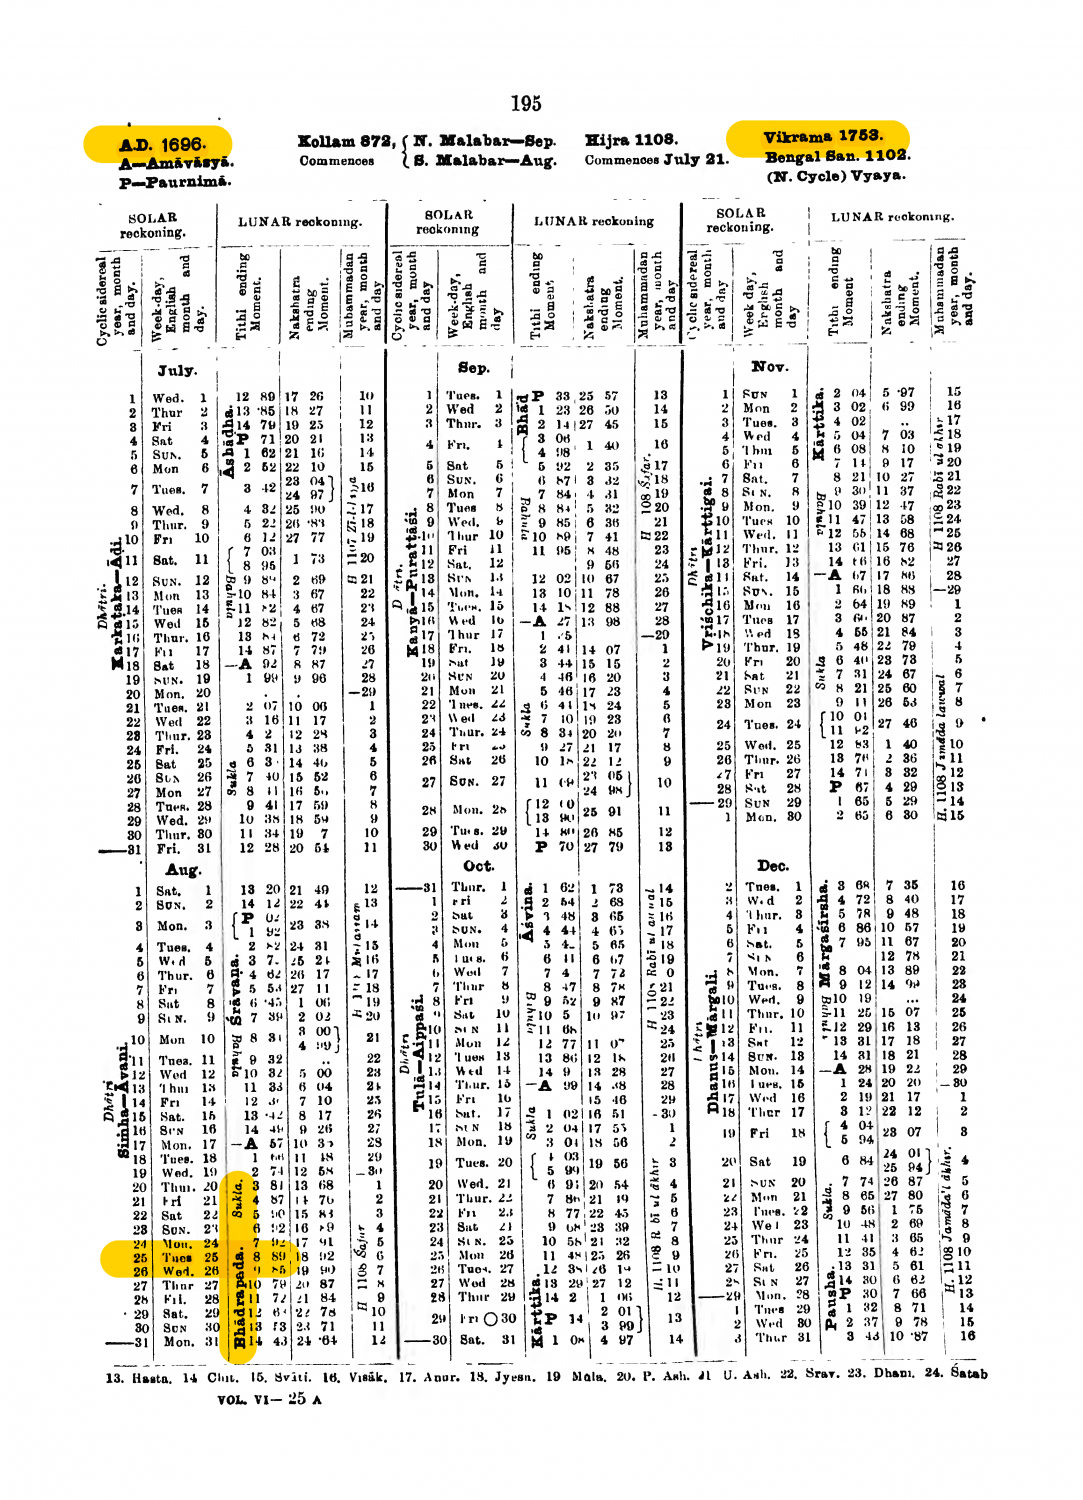 Pages-from-2015.73149.An-Indian-Ephemeris-Ad-700-To-Ad-1799-Vol-Iv_text.pdf-compressor.thumb.png.d63e01af069422e48e1b3c703629eacb.png